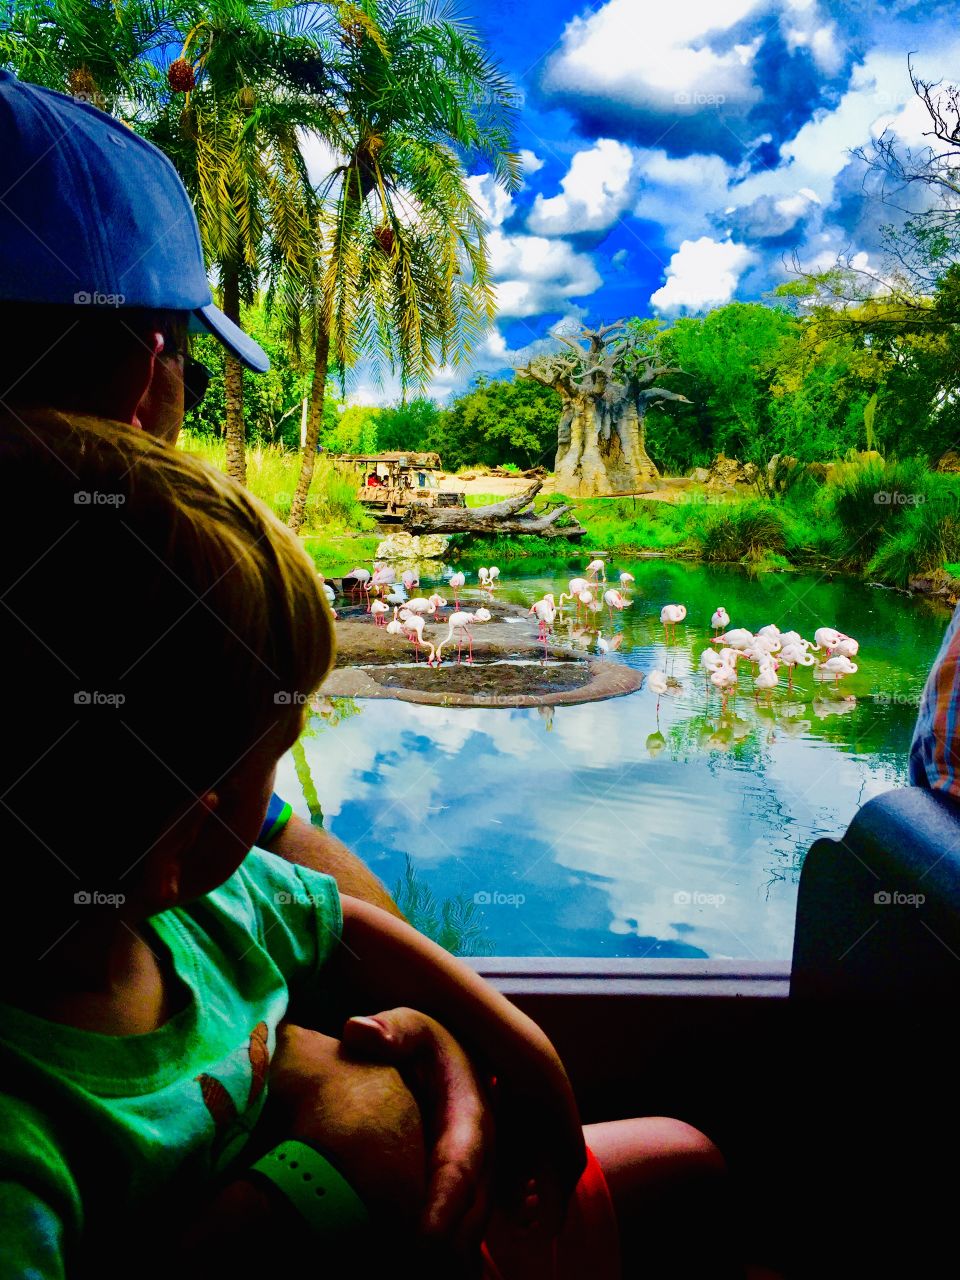 Safari ride at Animal kingdom in Disney world with blue sky reflecting on a secluded flamingo pond in summer in Florida 